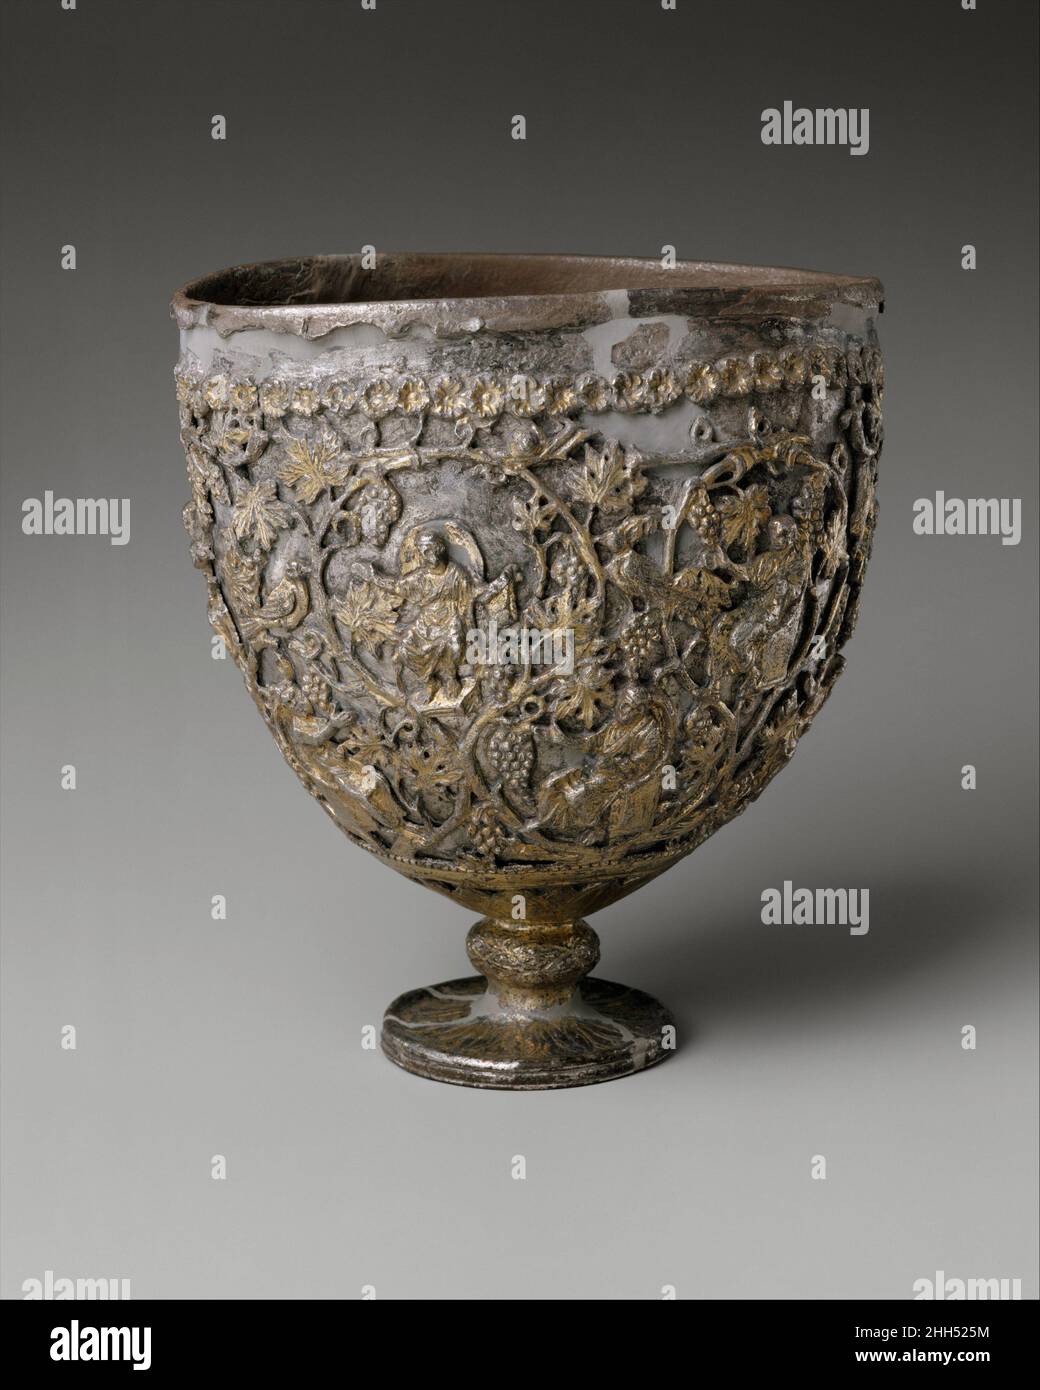 The Antioch 'Chalice' 500–550 Byzantine When it was discovered at the beginning of the twentieth century, this 'chalice' was claimed to have been found in Antioch, a city so important to the early Christians that it was recognized with Rome and Alexandria as one of the great sees of the church. The chalice's plain silver interior bowl was then ambitiously identified as the Holy Grail, the cup used by Christ at the Last Supper. The elaborate footed shell enclosing it was thought to have been made within a century after the death of Christ to encase and honor the Grail. The fruited grapevine for Stock Photo